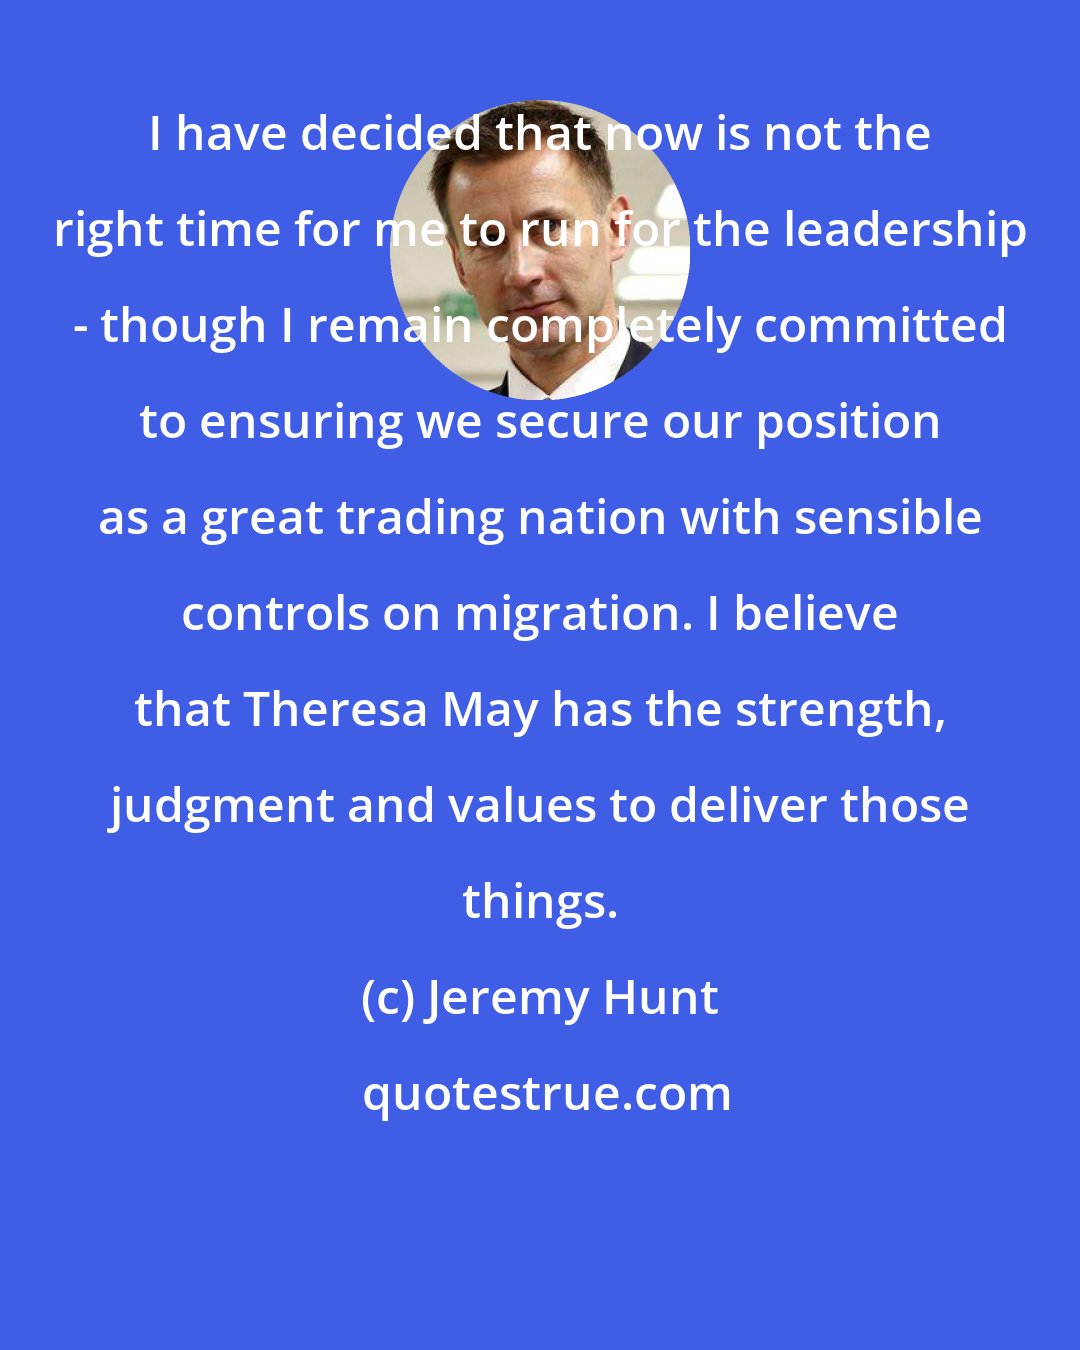 Jeremy Hunt: I have decided that now is not the right time for me to run for the leadership - though I remain completely committed to ensuring we secure our position as a great trading nation with sensible controls on migration. I believe that Theresa May has the strength, judgment and values to deliver those things.